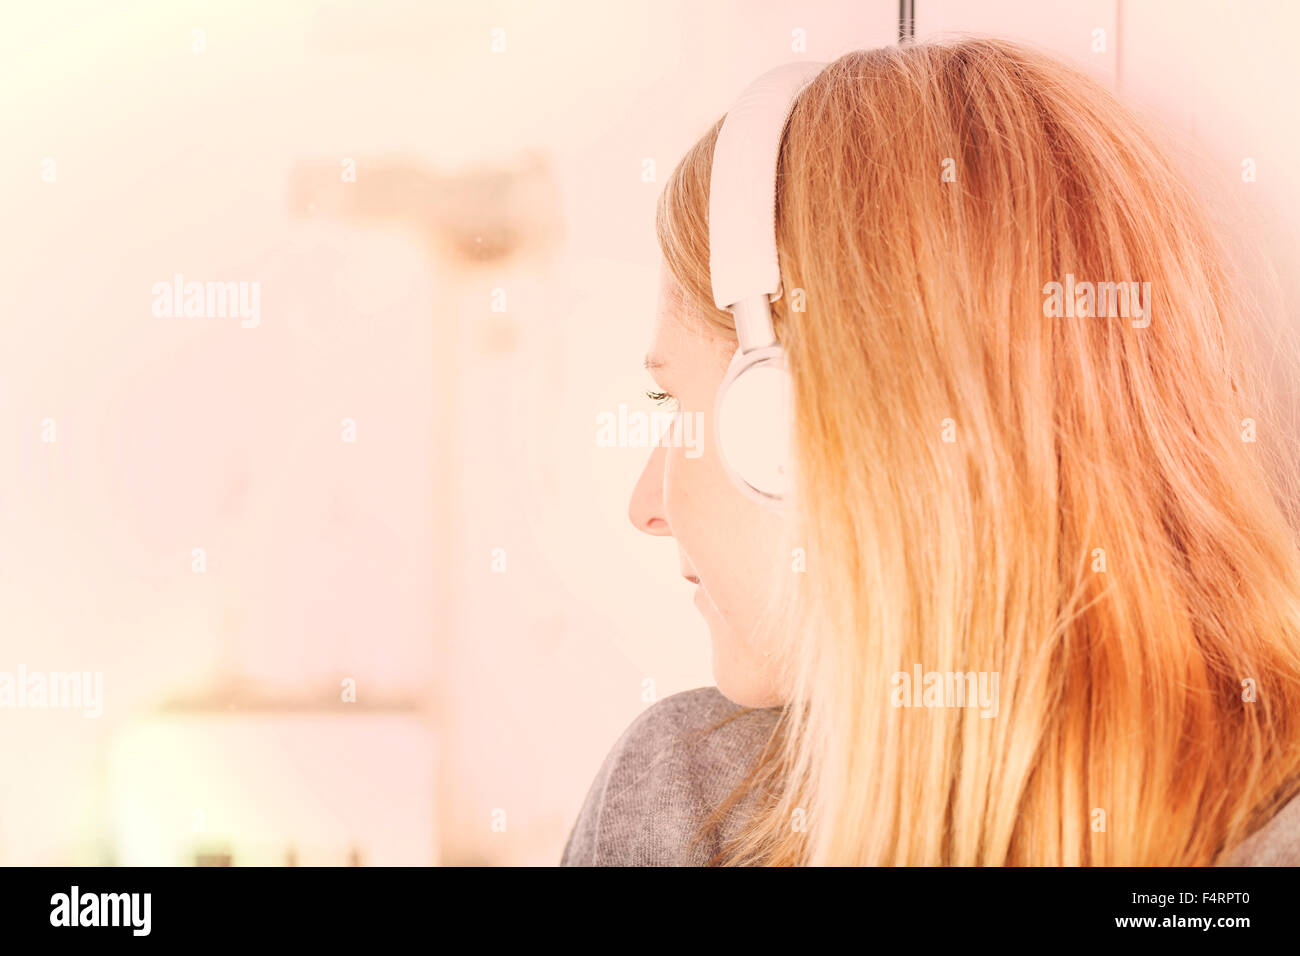 blond woman with headphones on window sill Stock Photo